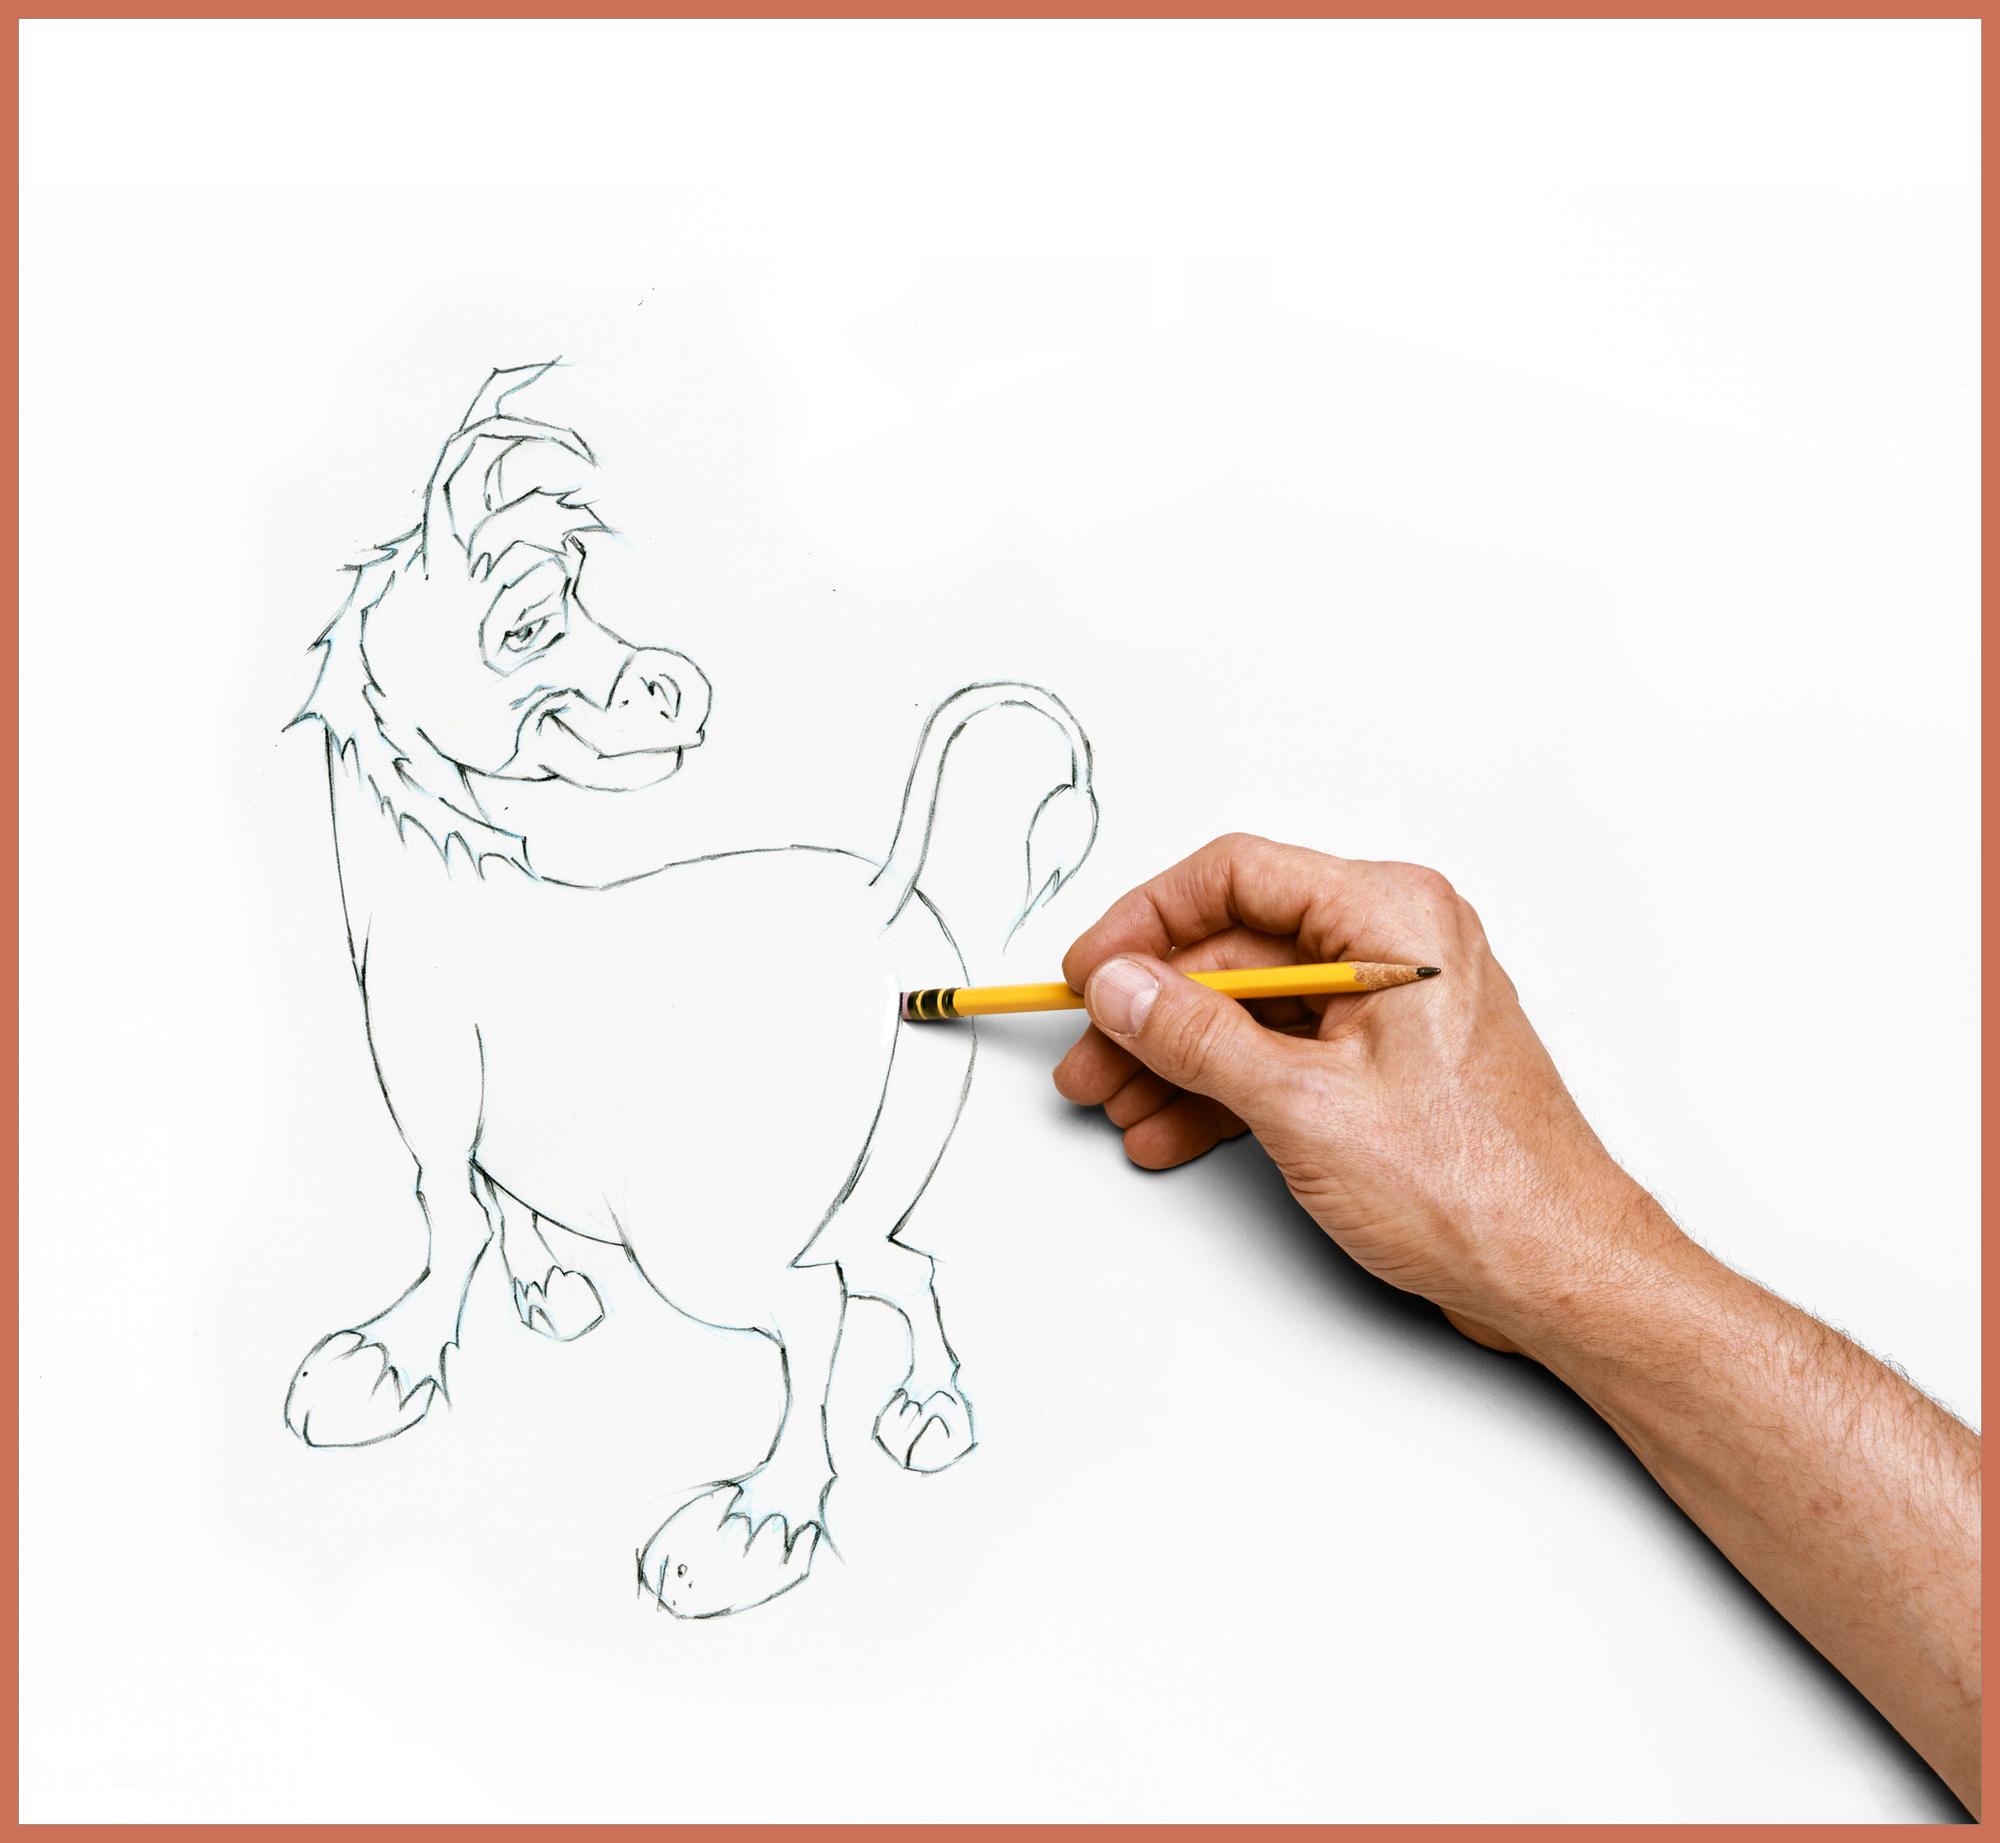 Against a white background, a pencil drawn cartoon donkey looks back at the hand drawing it. The eraser at the end of a pencil rubs into the donkey's anus. The donkey smiles, almost excited by the touch of the artist.